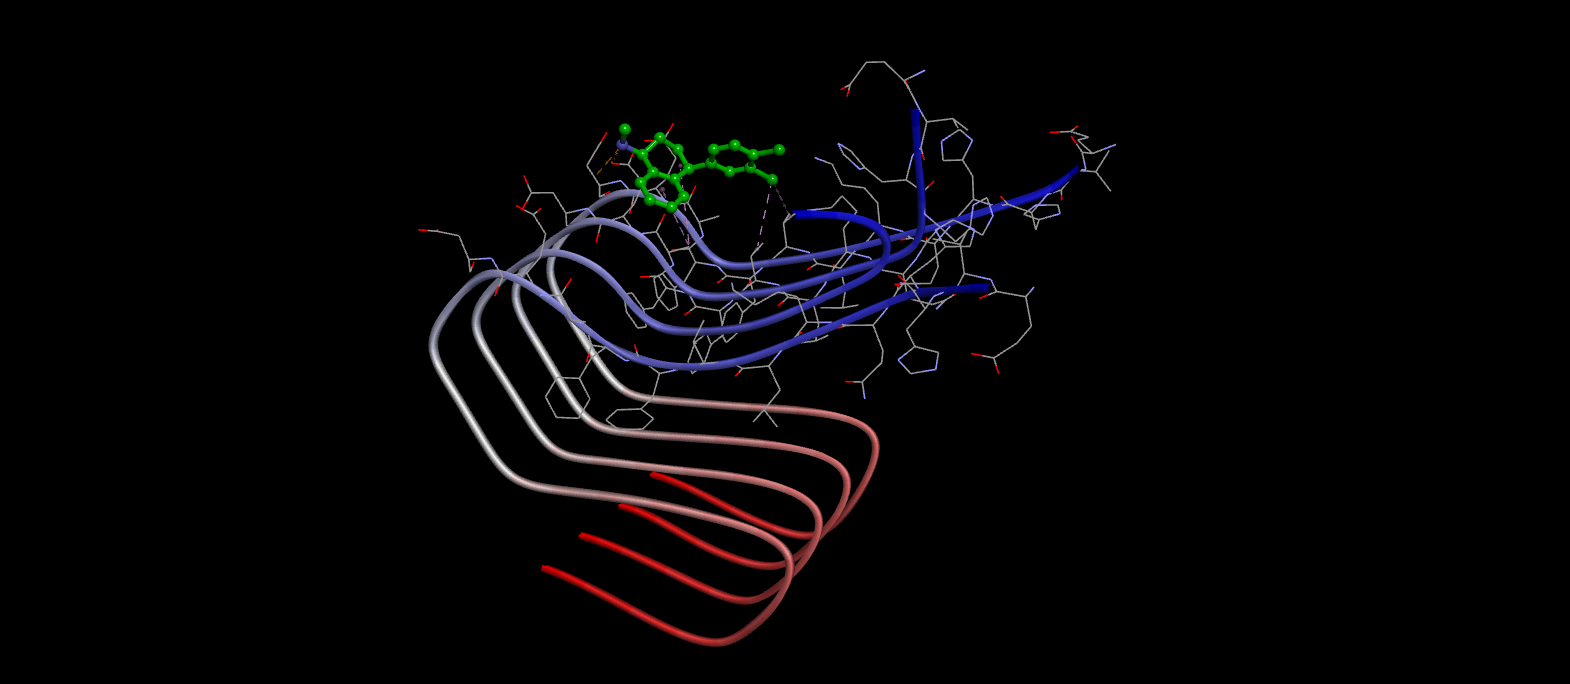 SSRI binding to string of amyloid beta